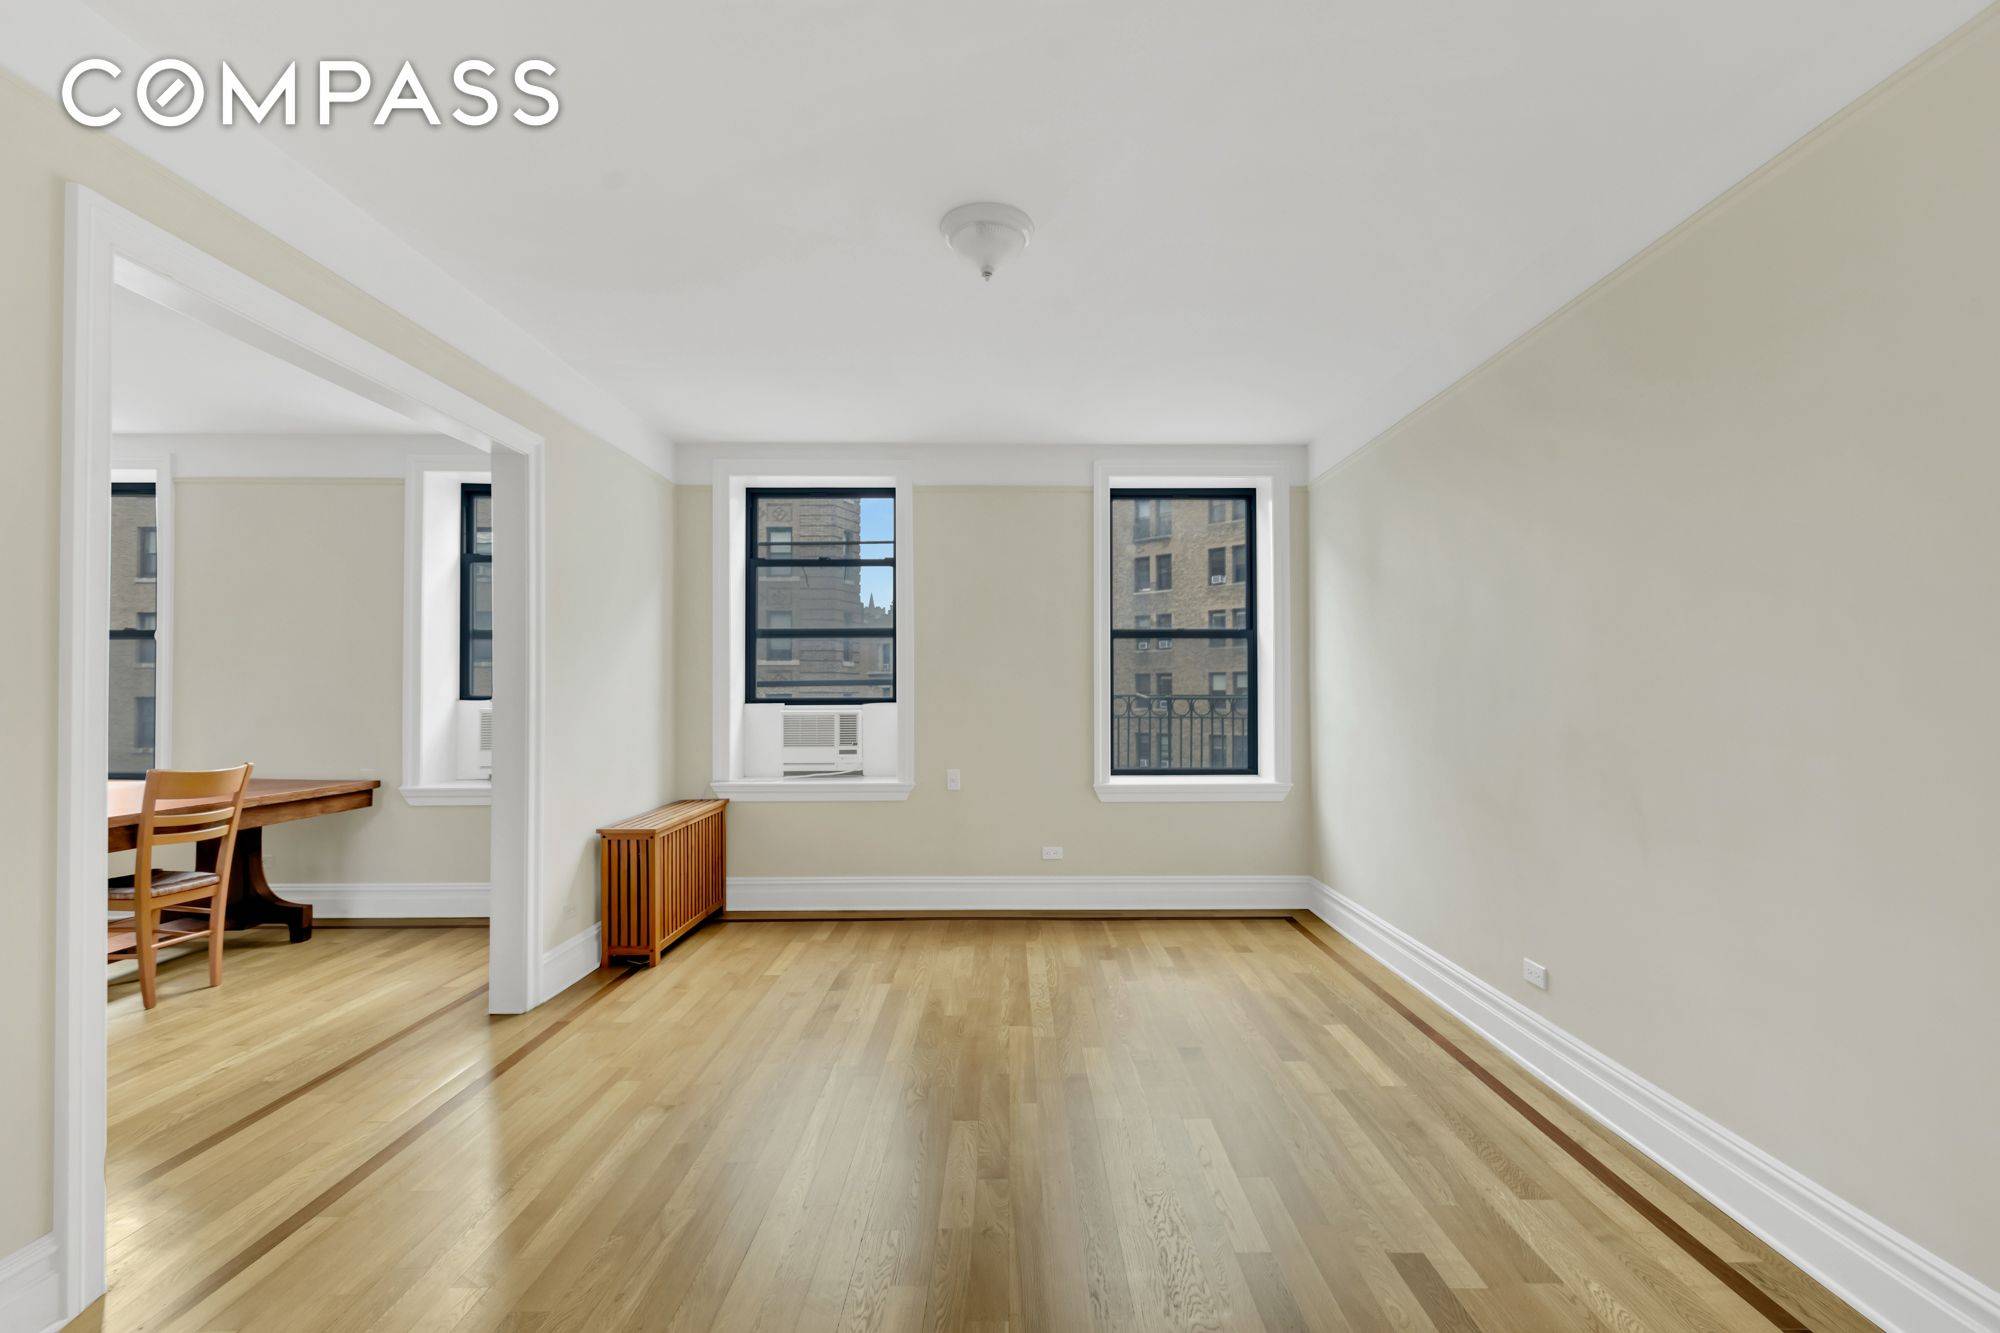 Welcome to this impressive 2 Bed 1 Bath condo apartment perched on the top floor in the bucolic Audubon Park Historic District of southern Washington Heights.